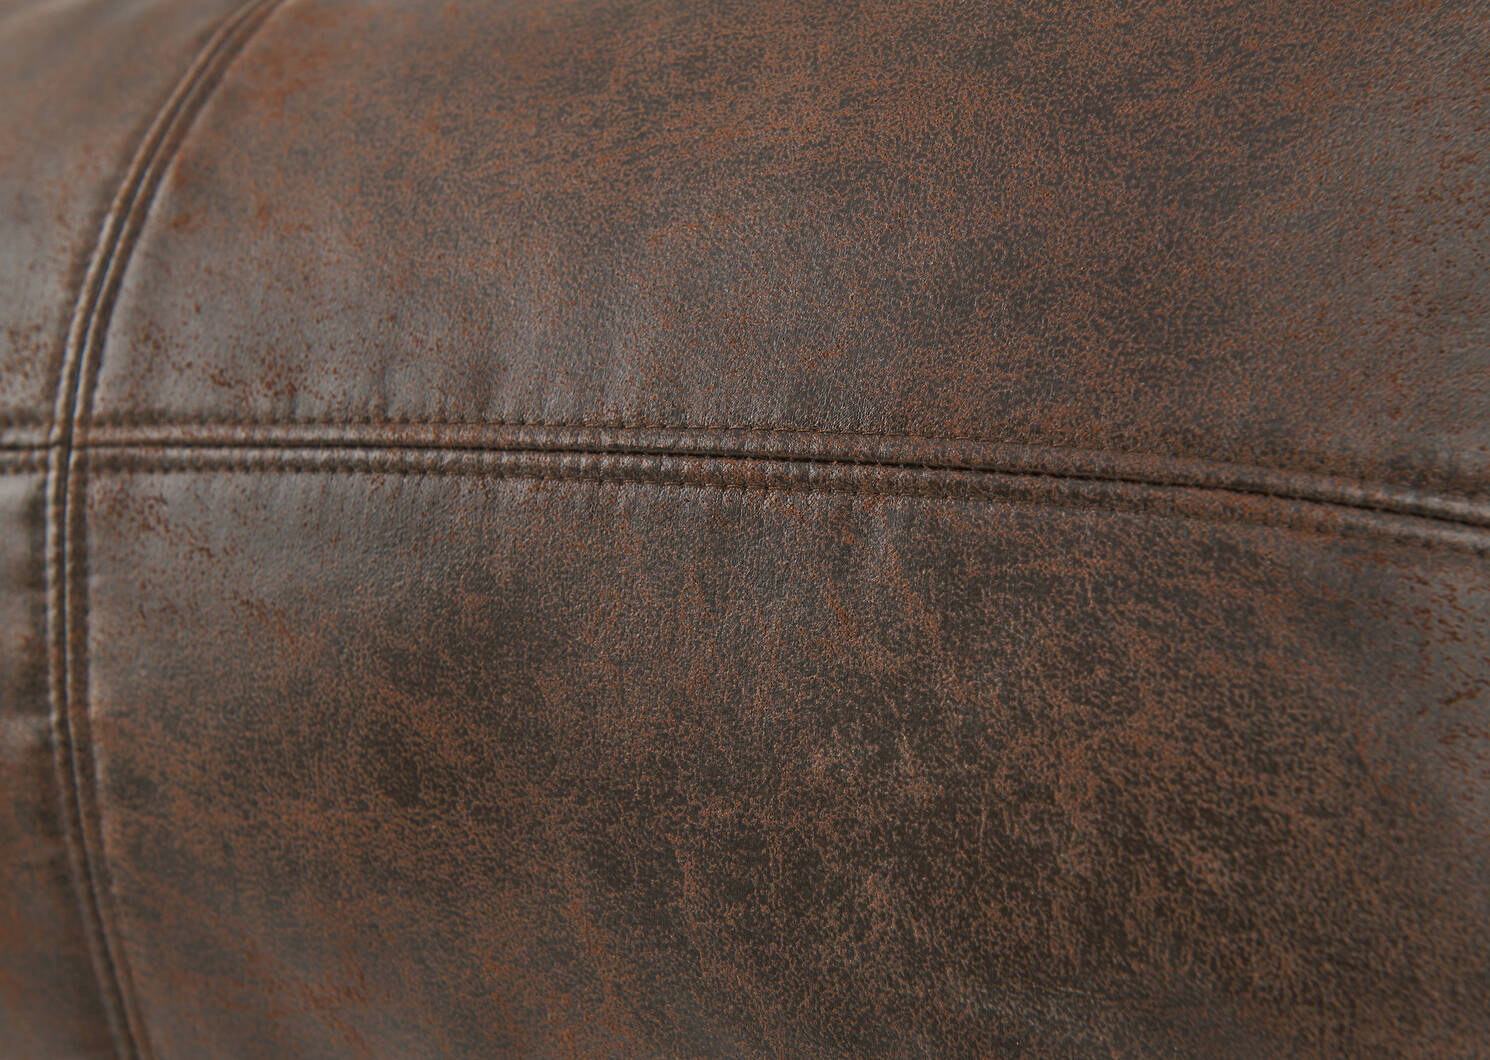 Jarvis Faux Leather Toss 12x22 Dark Brown